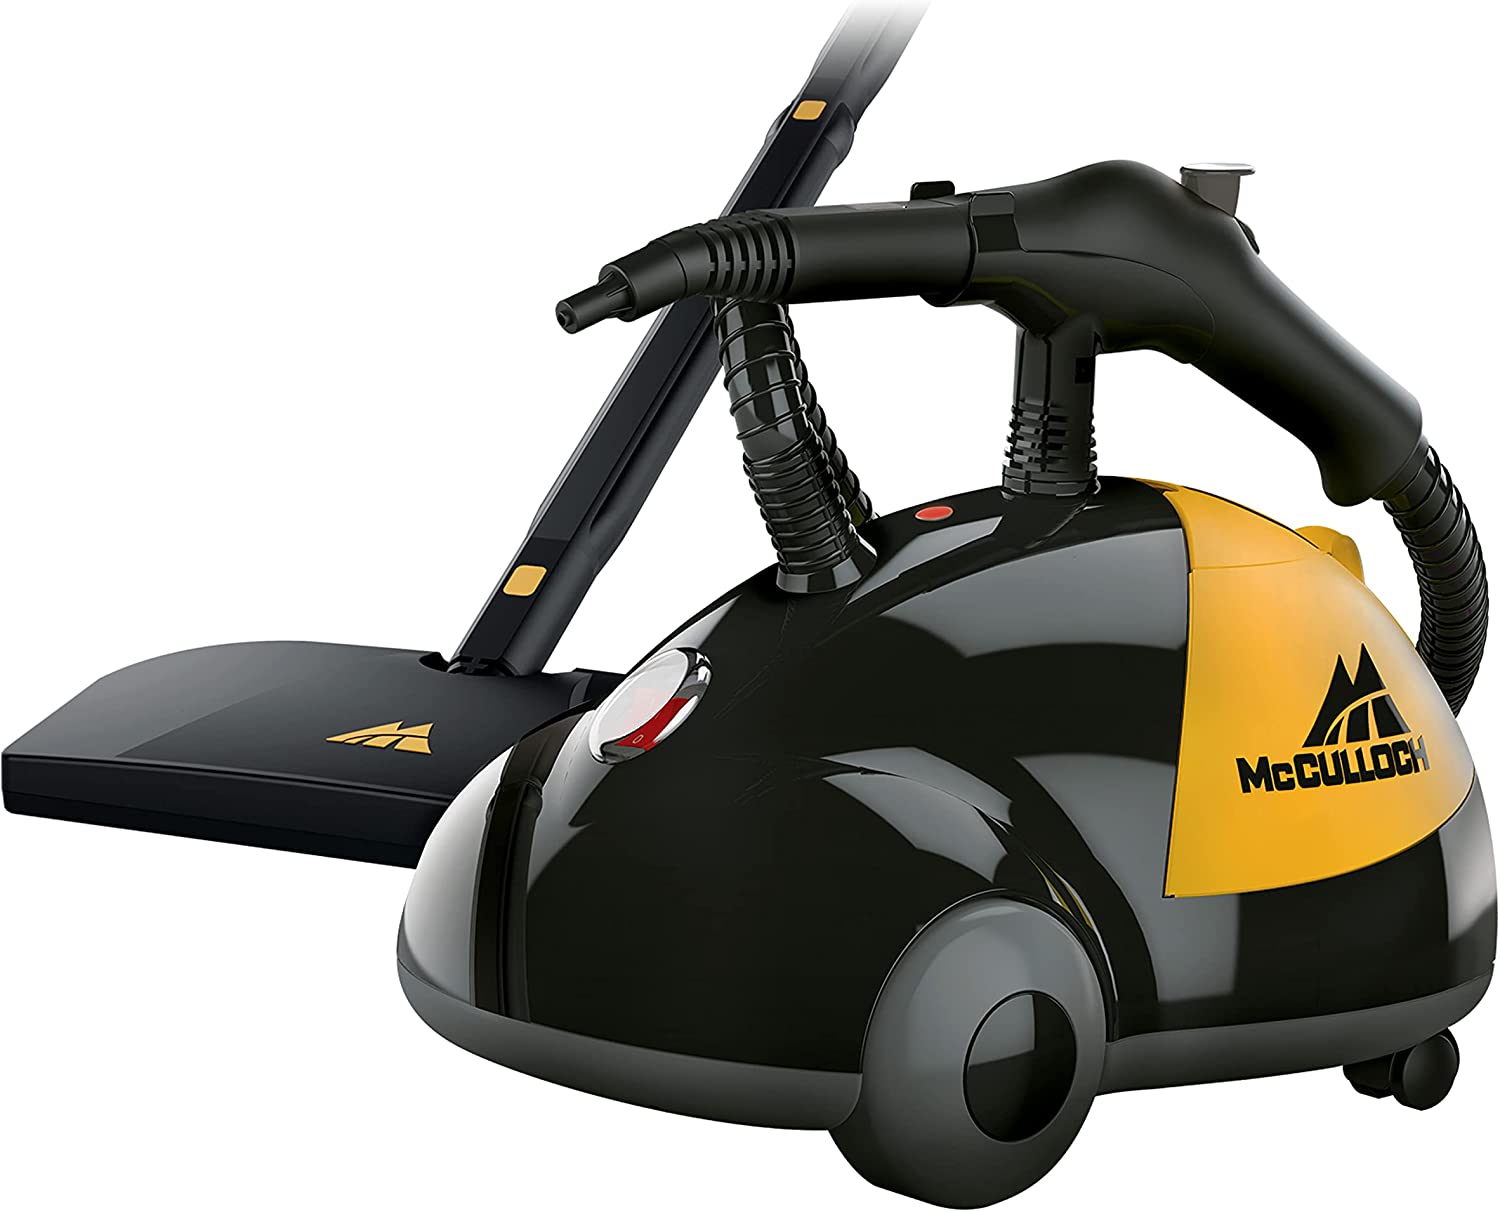 McCulloch MC1275 Certified Lockable Trigger Steam Cleaner